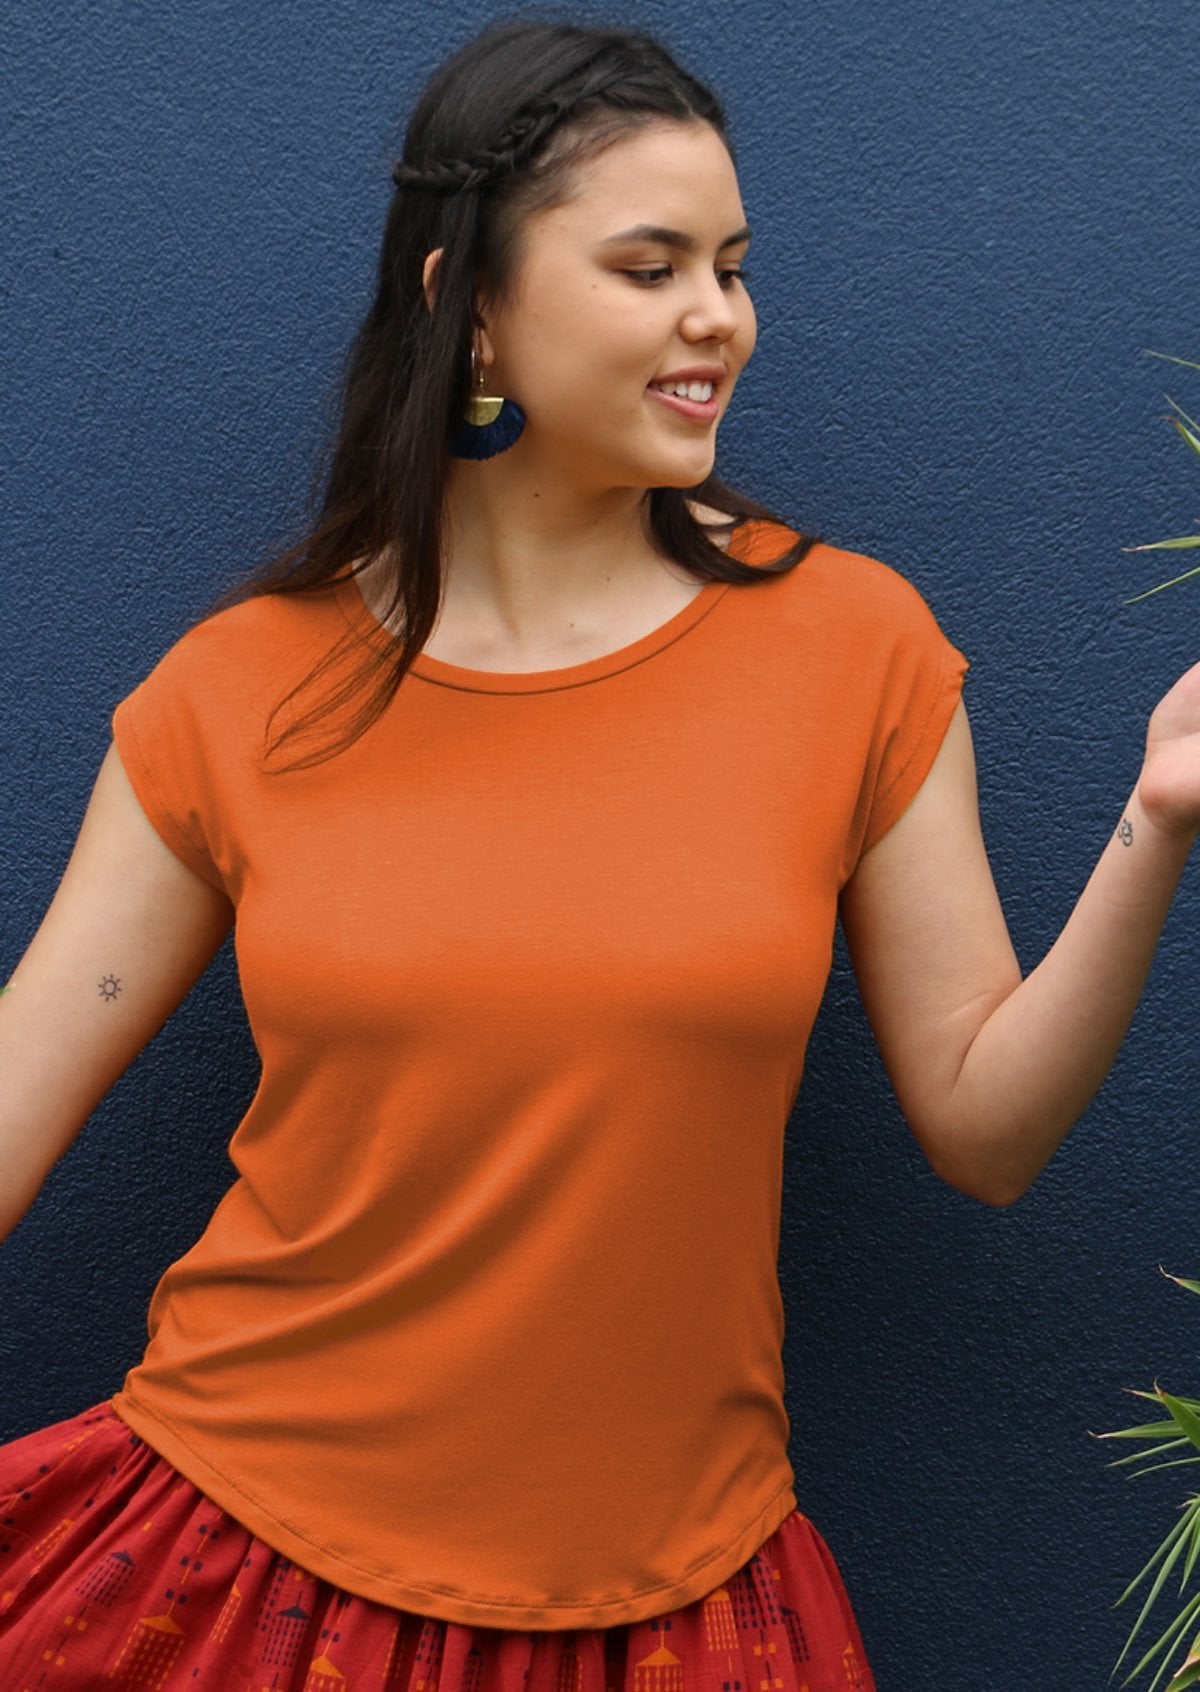 Shell Tee shirt in many colours